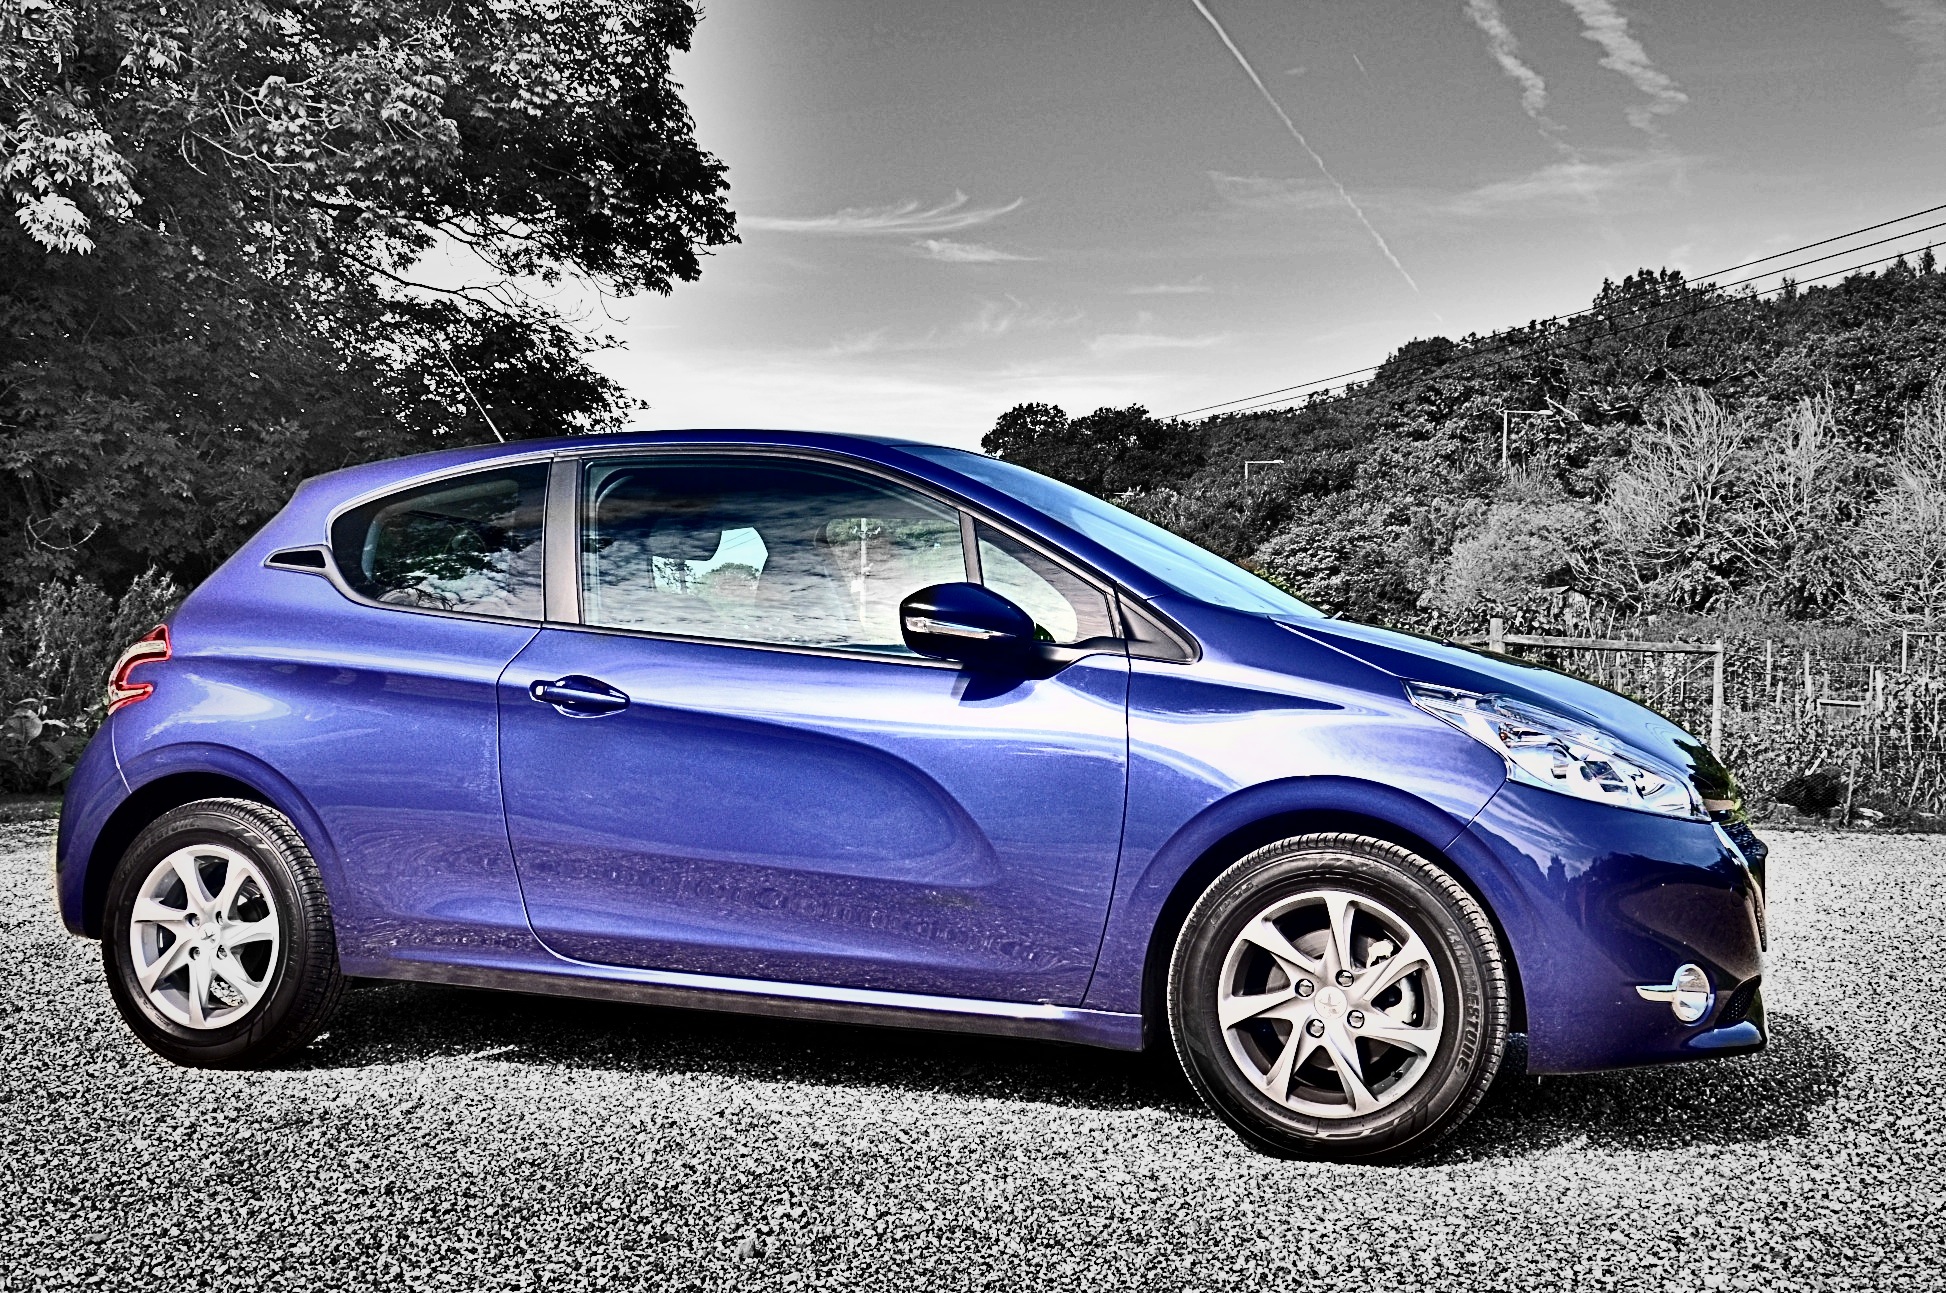 Highly successful Peugeot 208 following in the footsteps of the 205